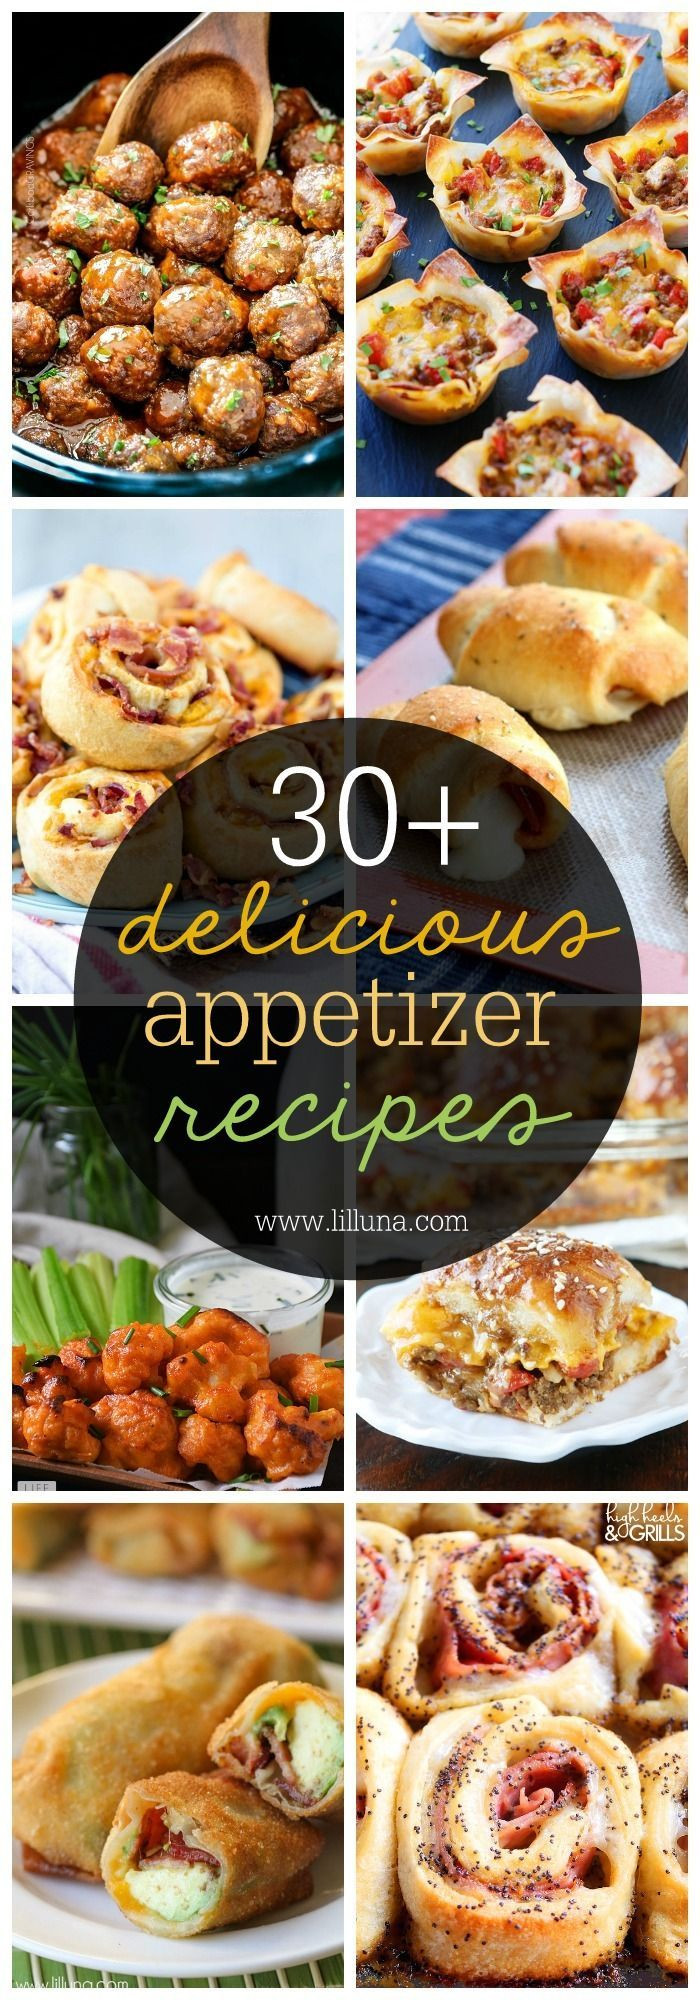 Great Appetizers For Christmas Party
 30 Appetizer Recipes a great collection for parties